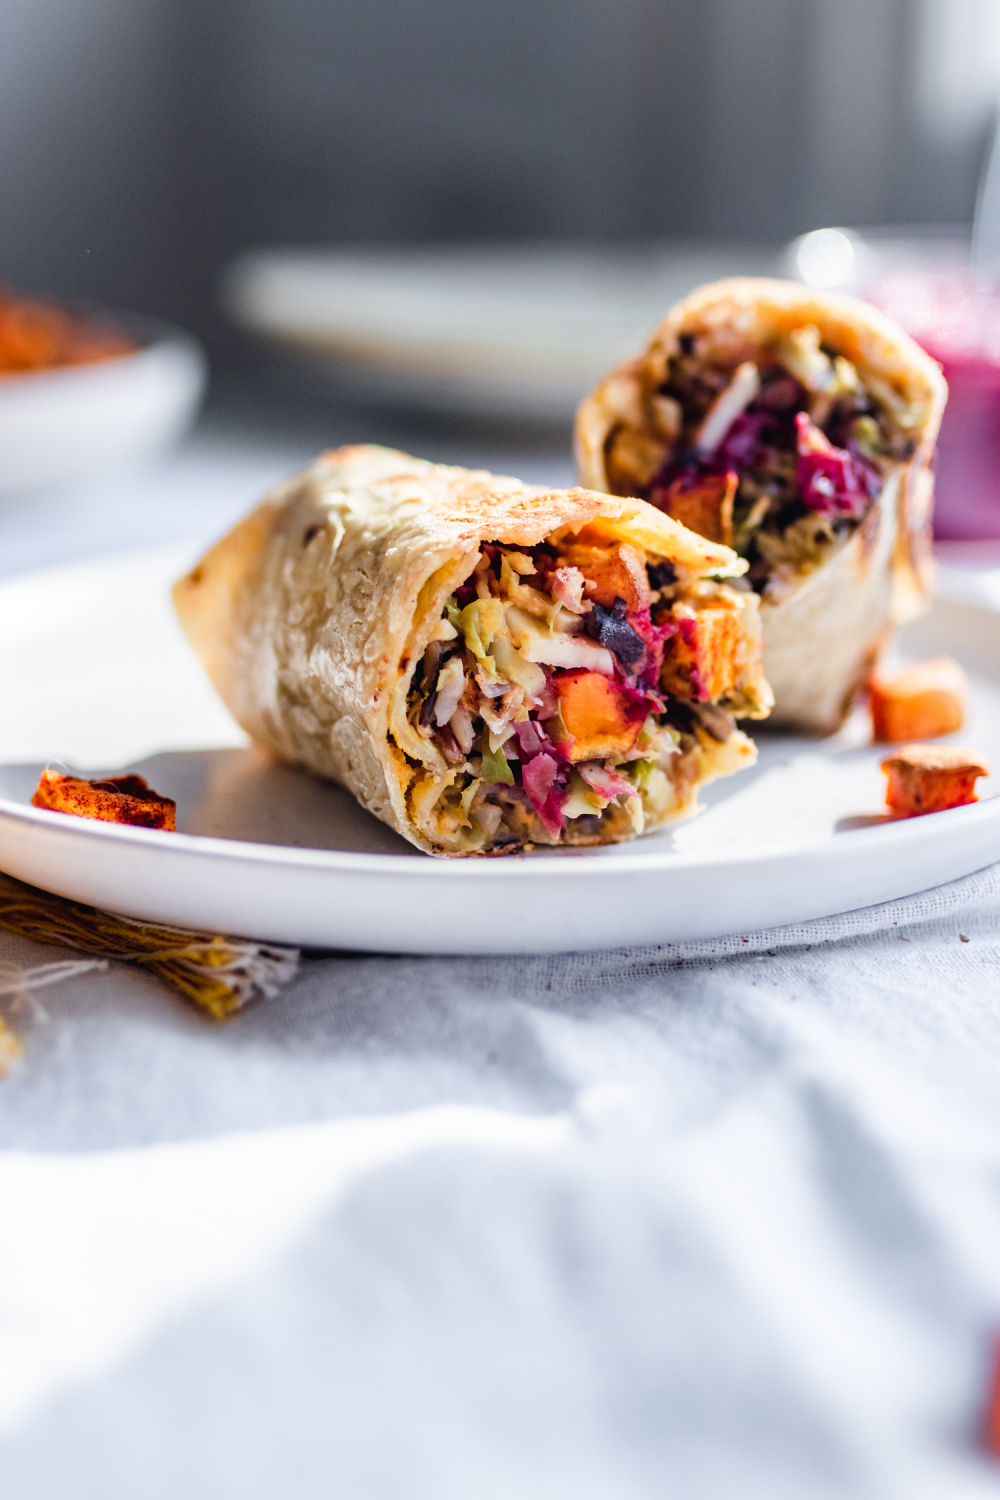 Vegan wrap cut in half, stuffed with squash, brussels sprouts, cranberries, sweet potatoes block-cover-recipe apples